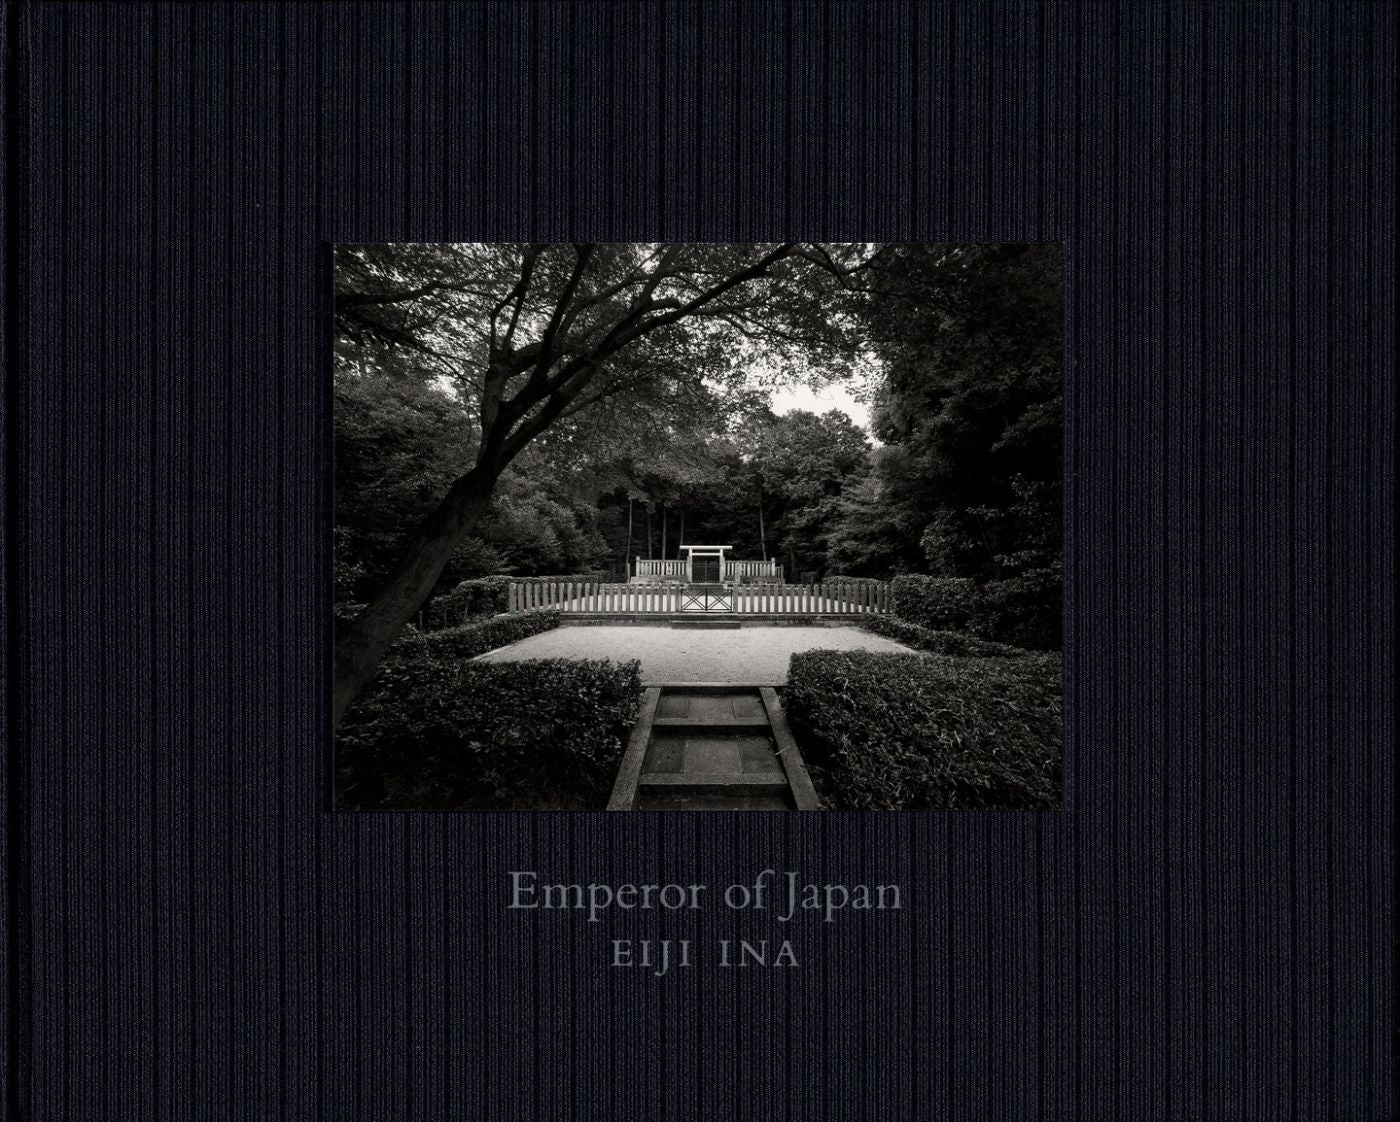 Eiji Ina: Emperor of Japan, Special Limited Edition (with Gelatin Silver Print)